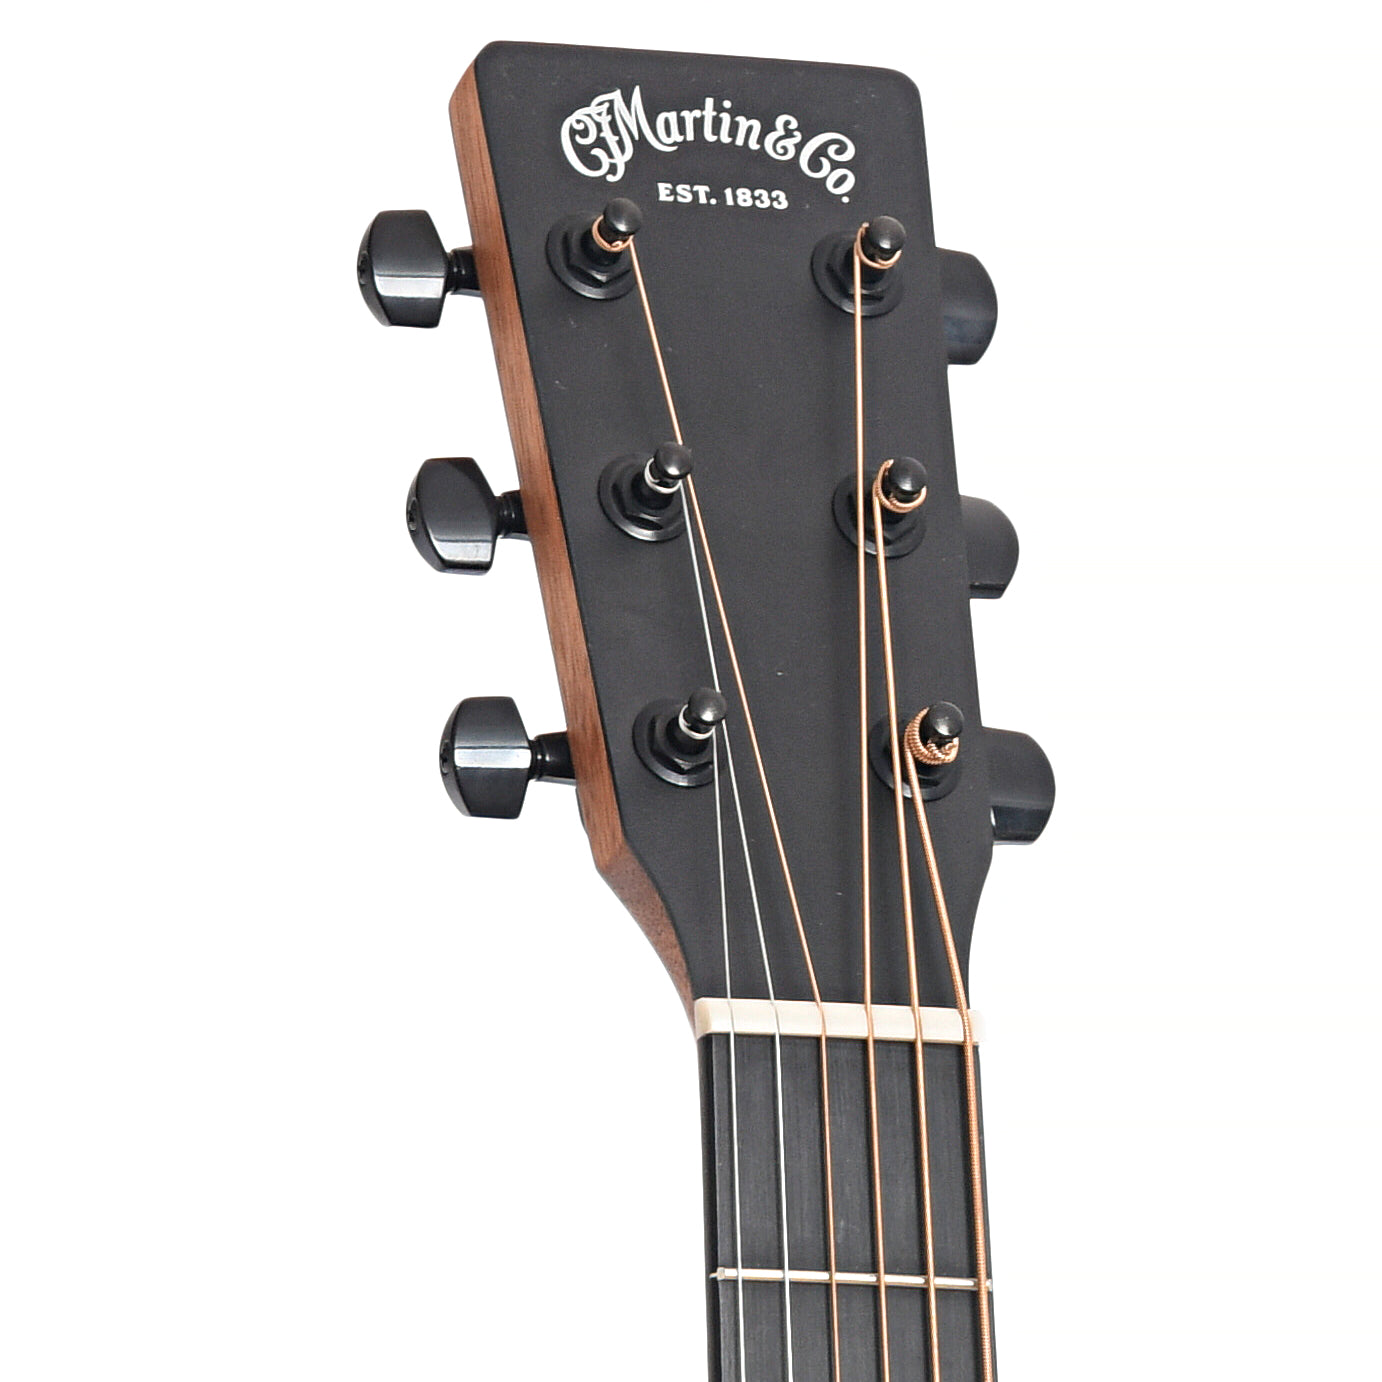 Front headstock of Martin D-12E Koa Lefthanded Guitar with Pickup 